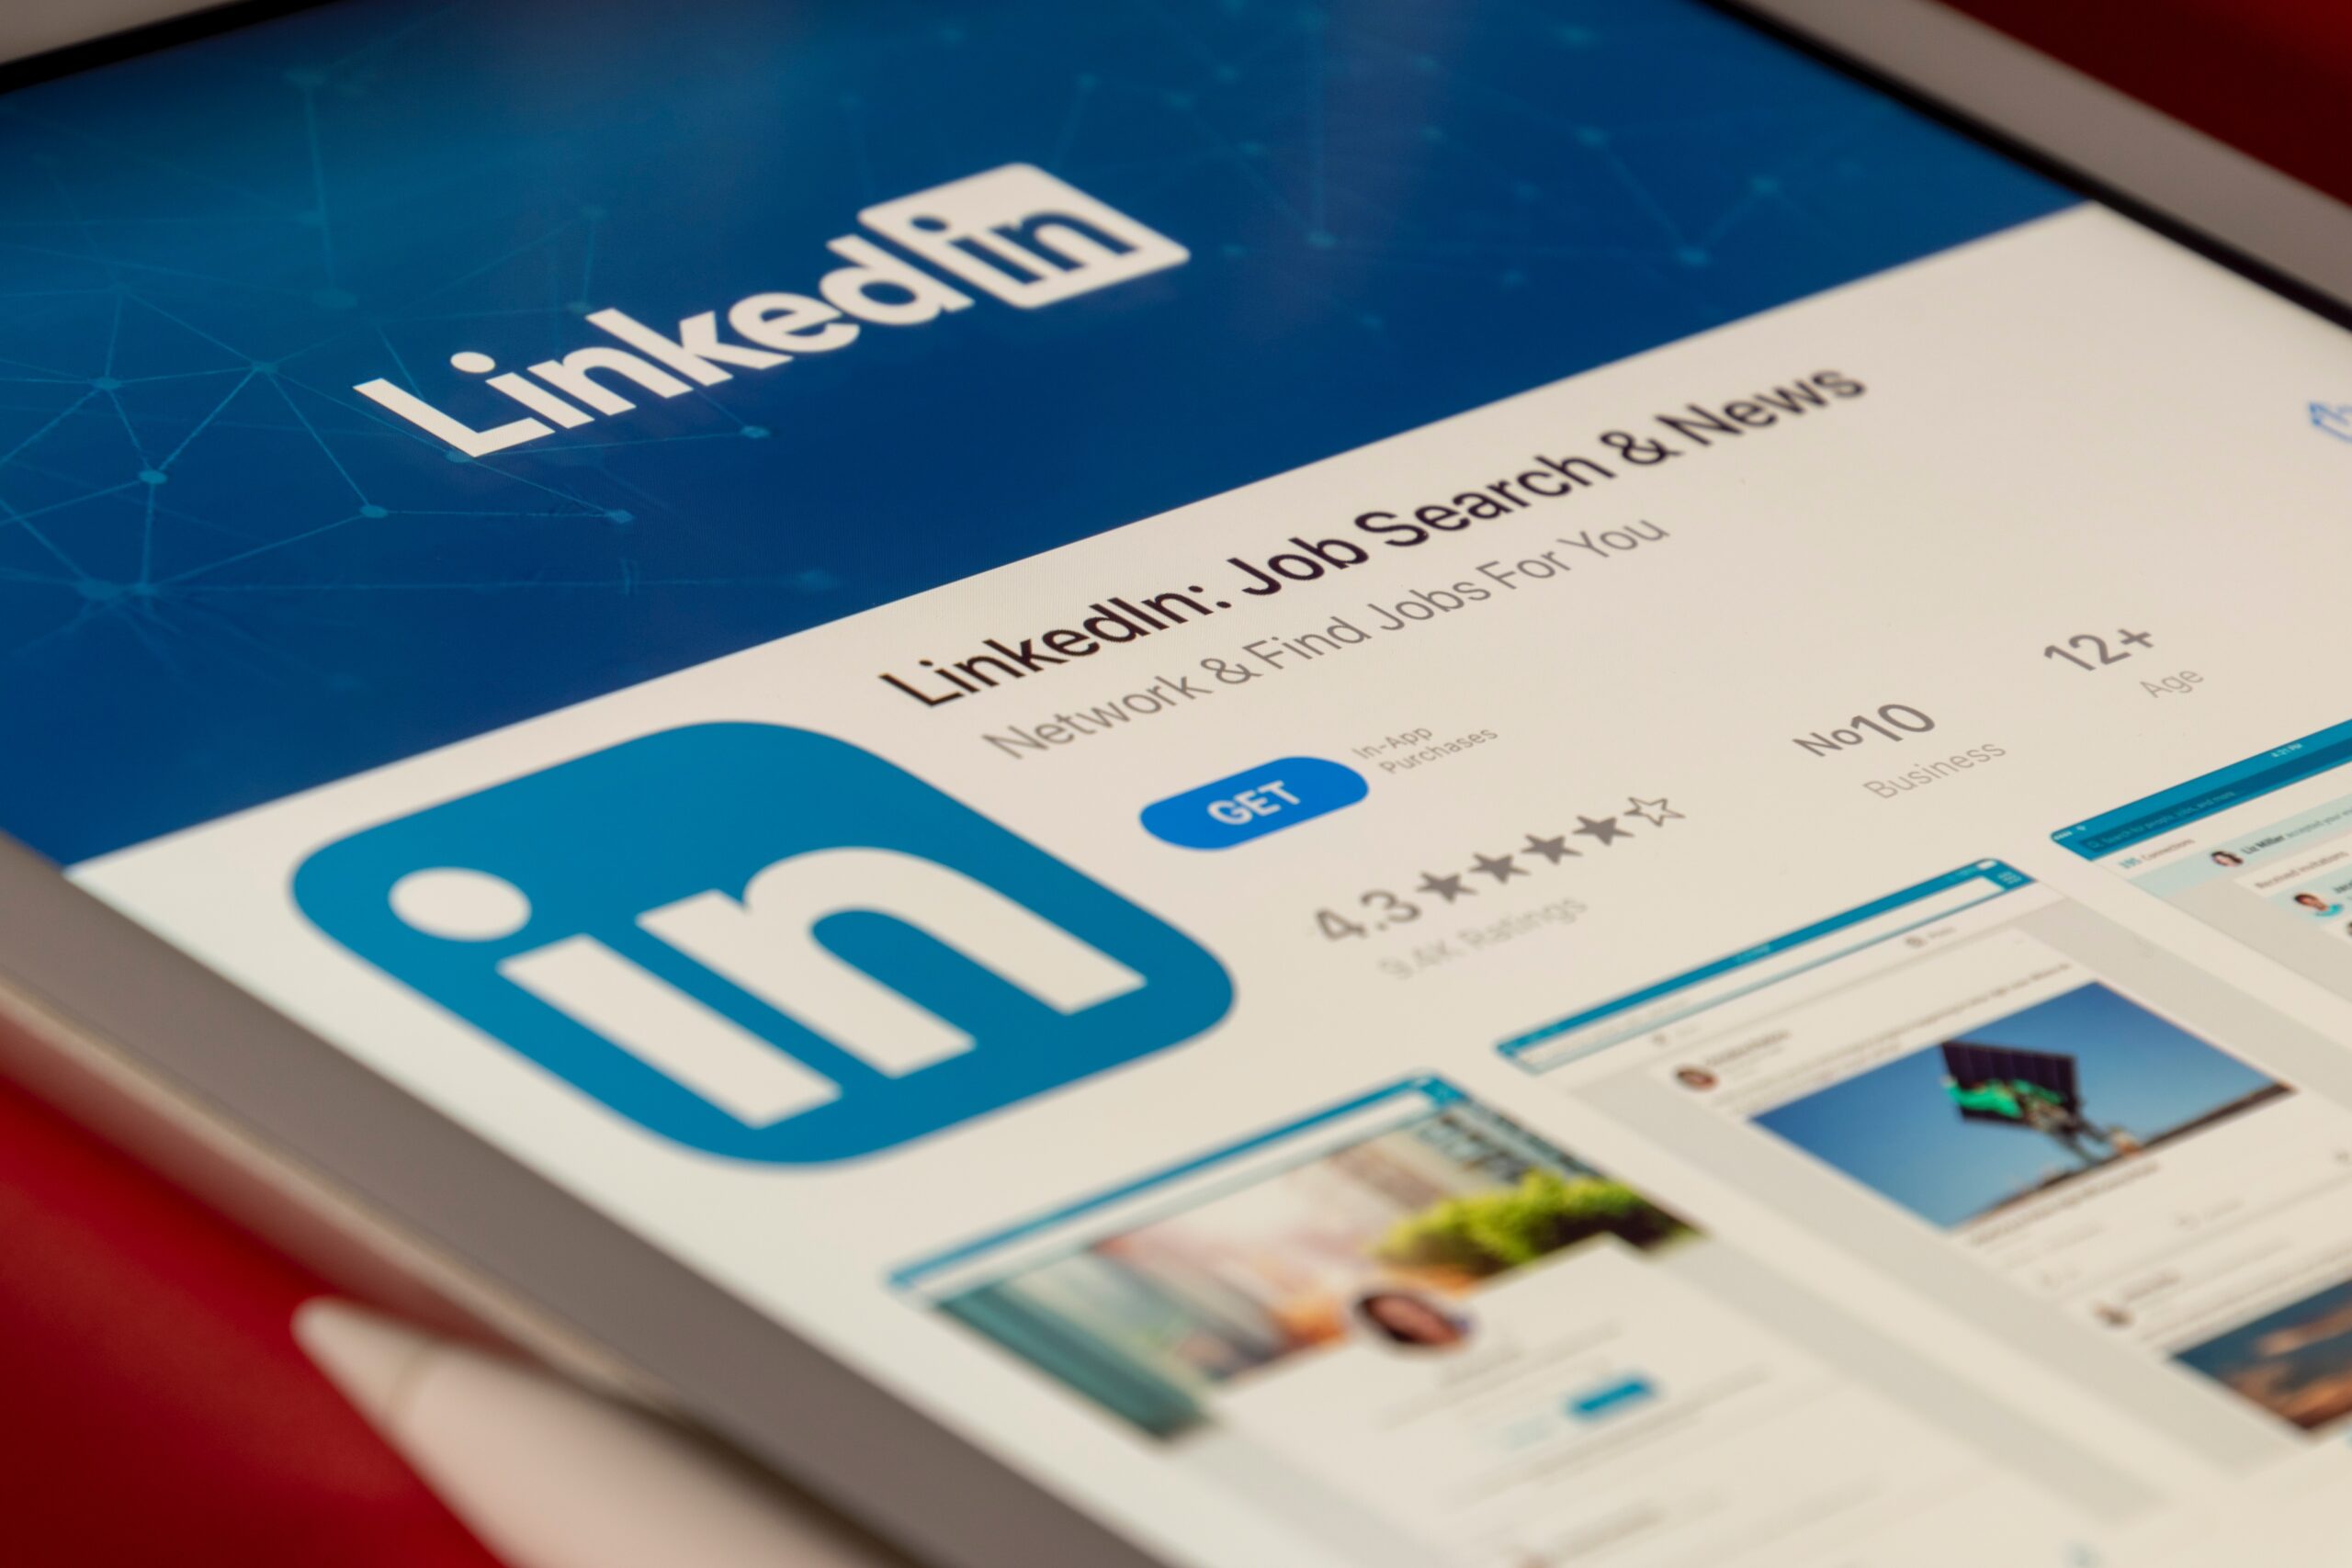 Building Brand Awareness on LinkedIn: Creating Meaningful Connections and Trust